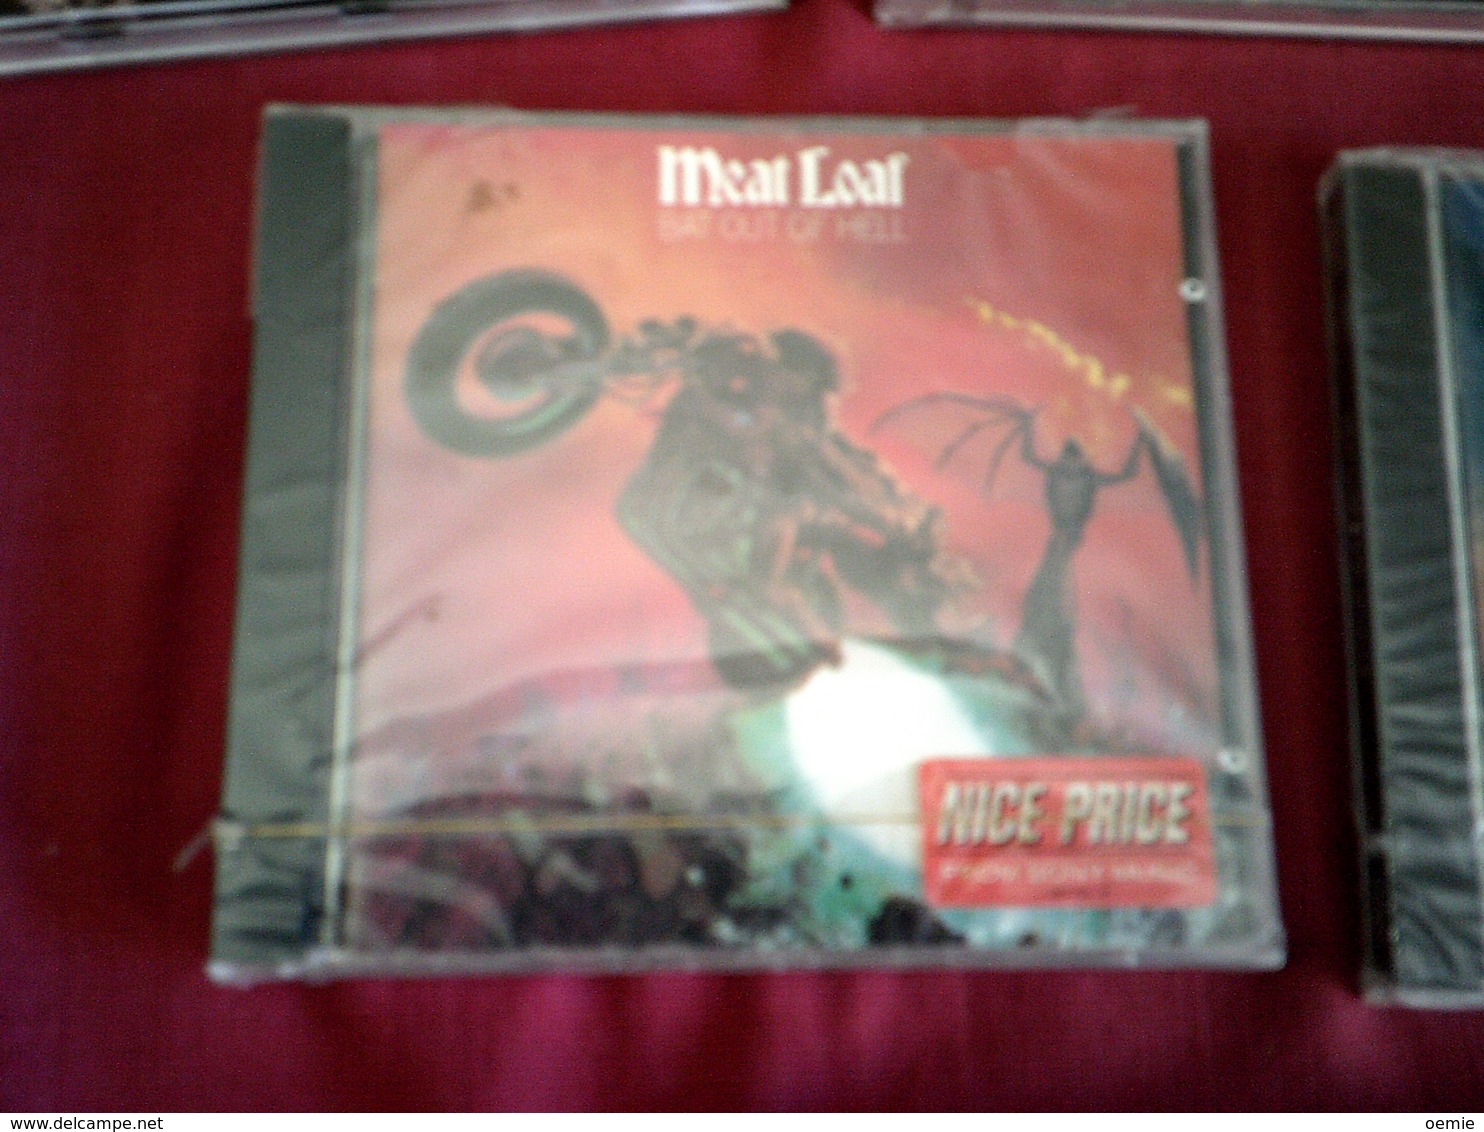 MEAT LOAF °  COLLECTION DE 6 CD DIFFERENTS - Hard Rock & Metal